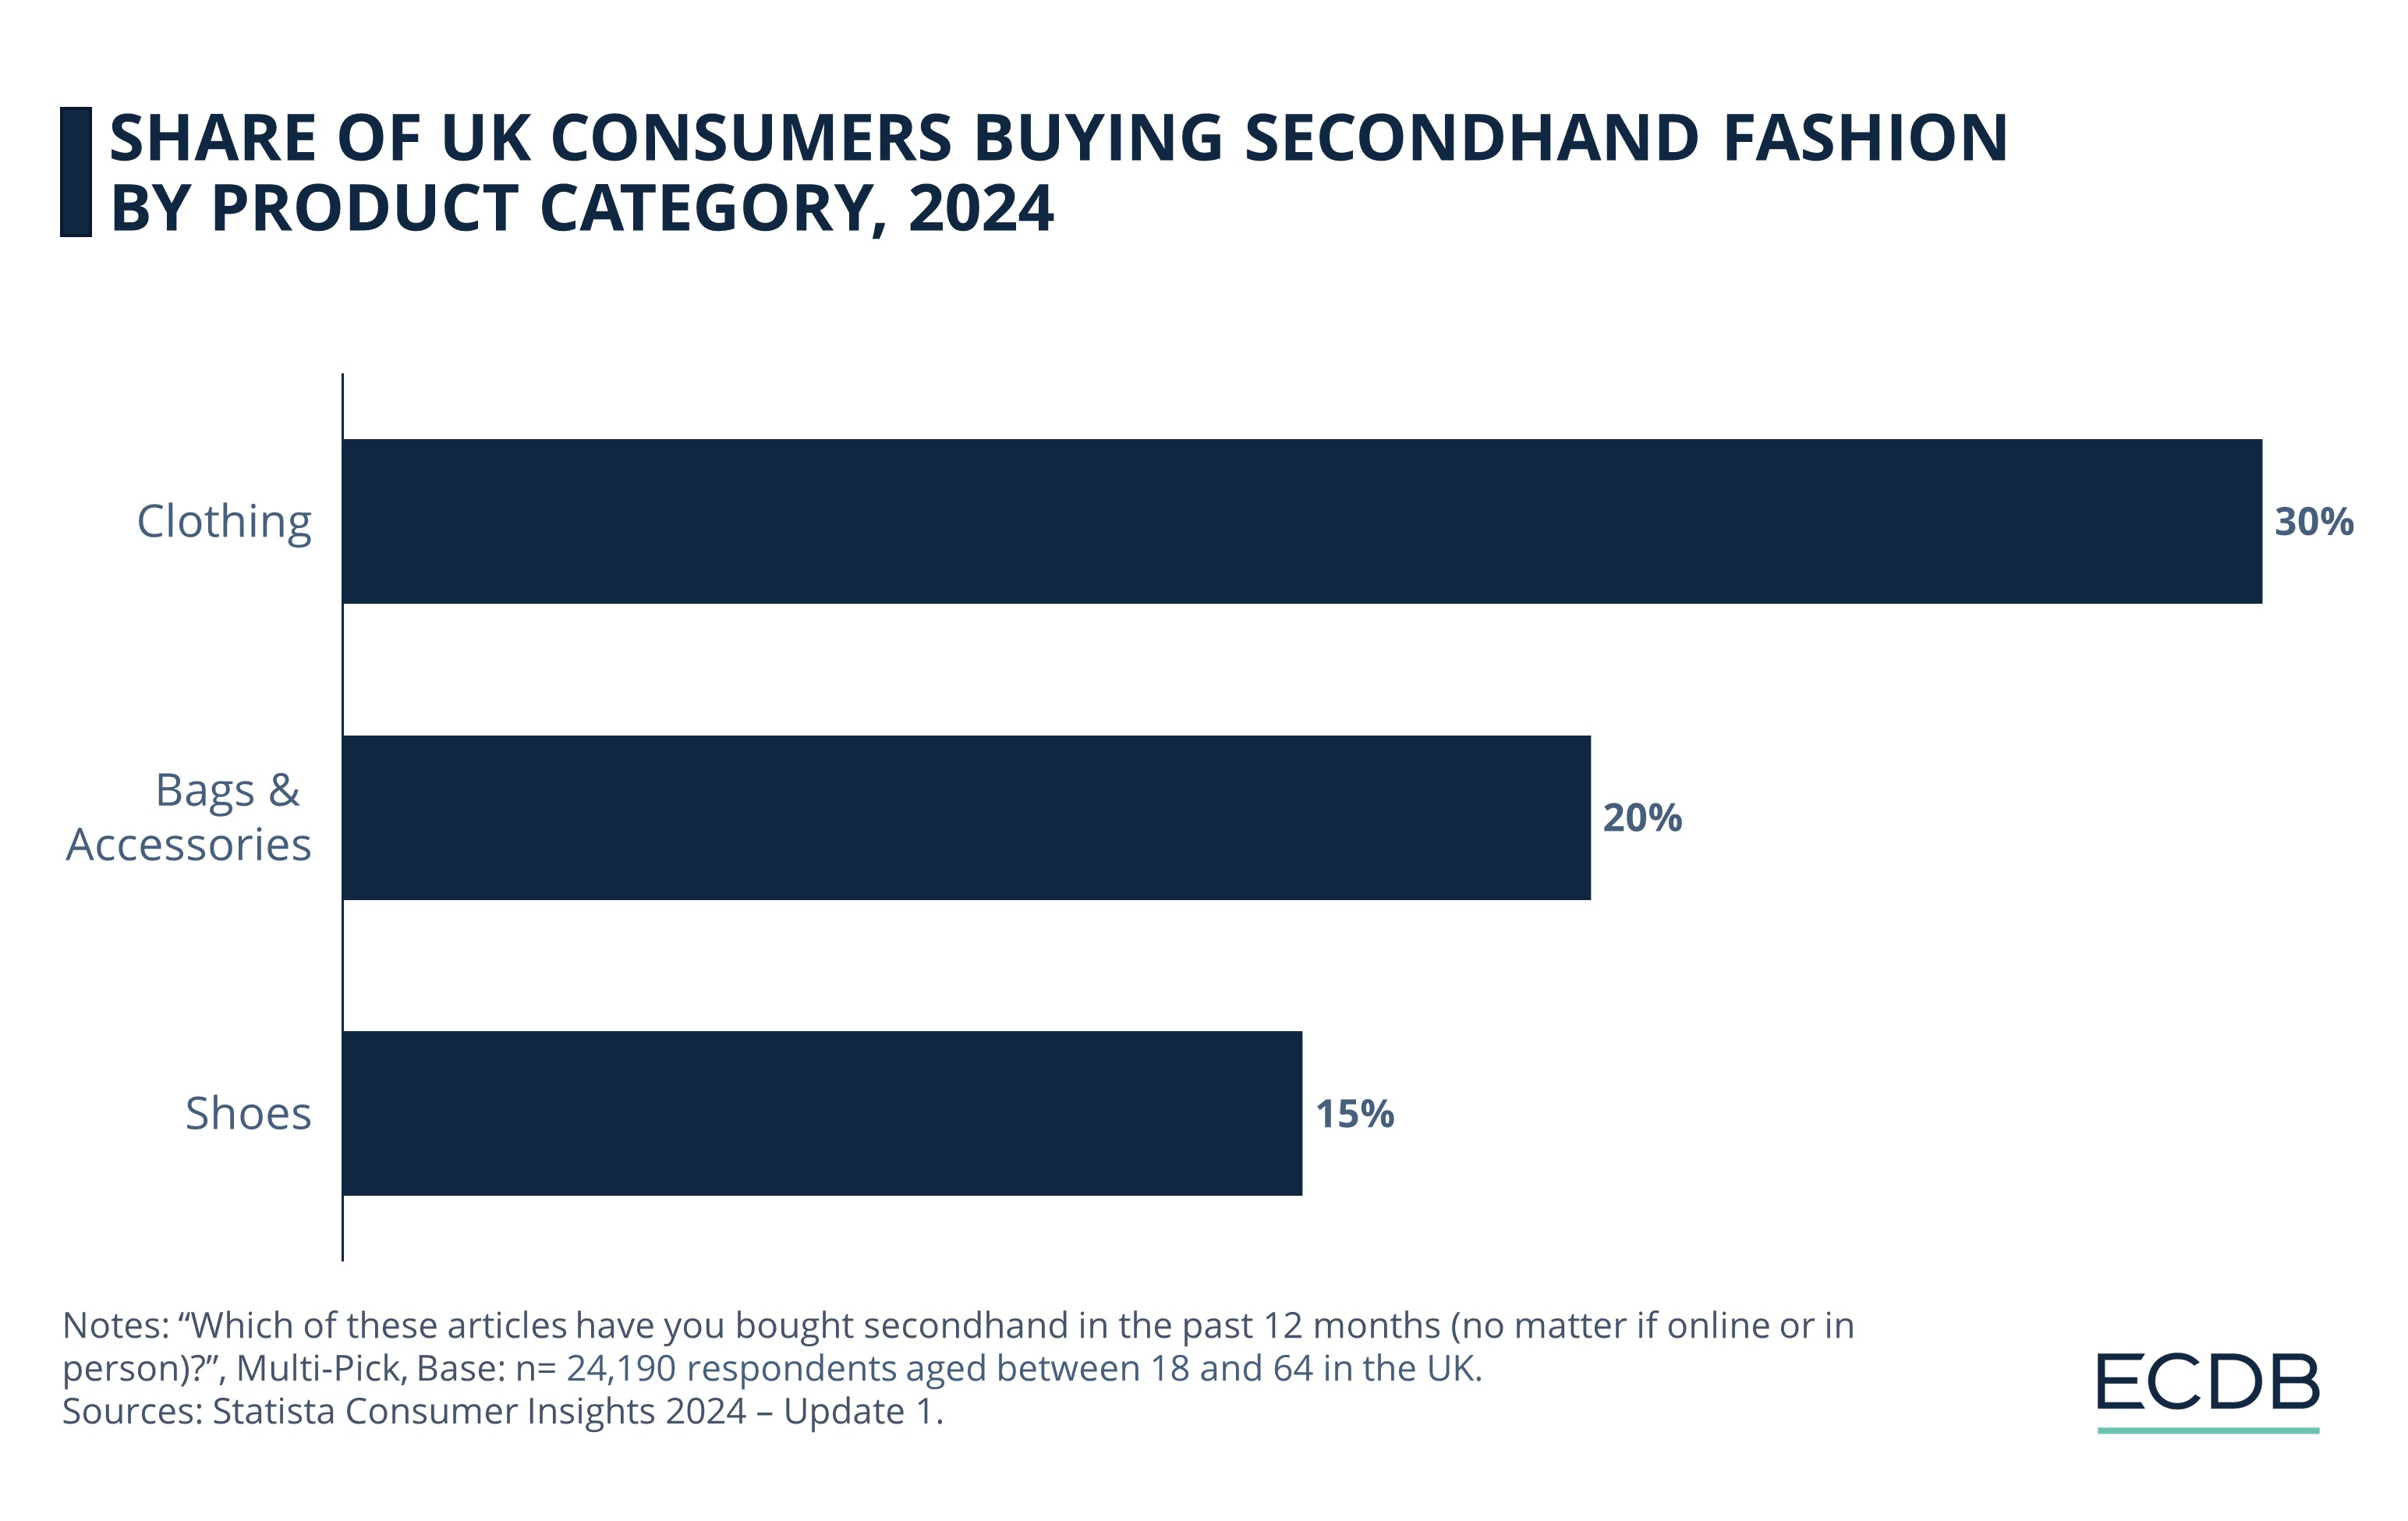 Share of UK Consumers Buying Secondhand Fashion by Product Category, 2024